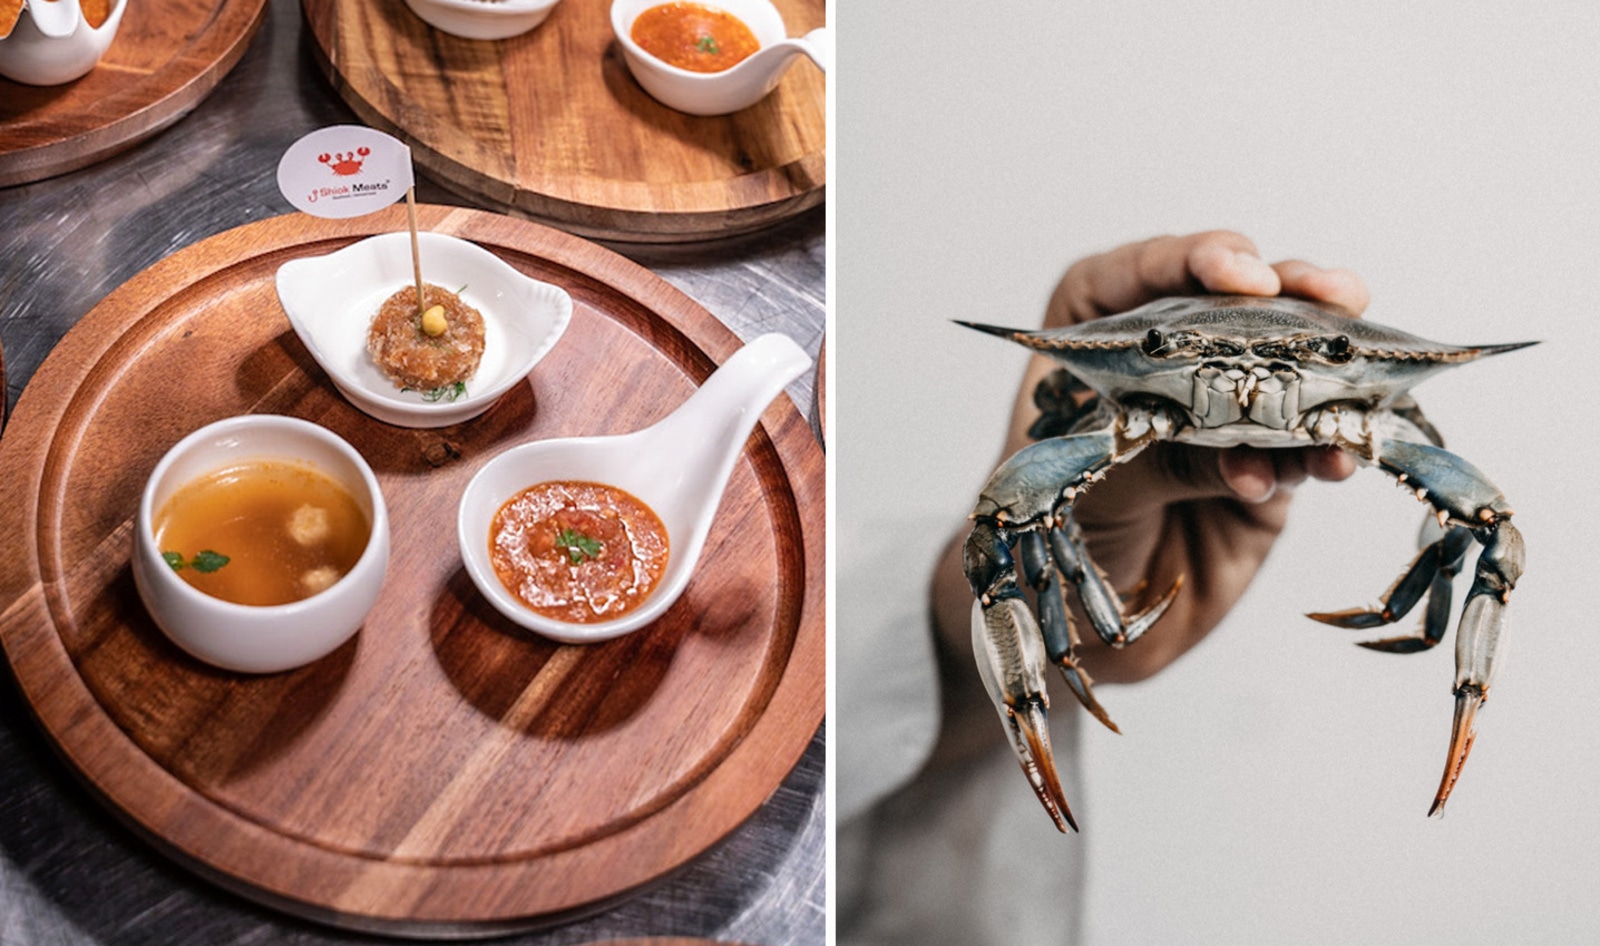 Singapore Gets a Taste of the World's First Lab-Grown Crab